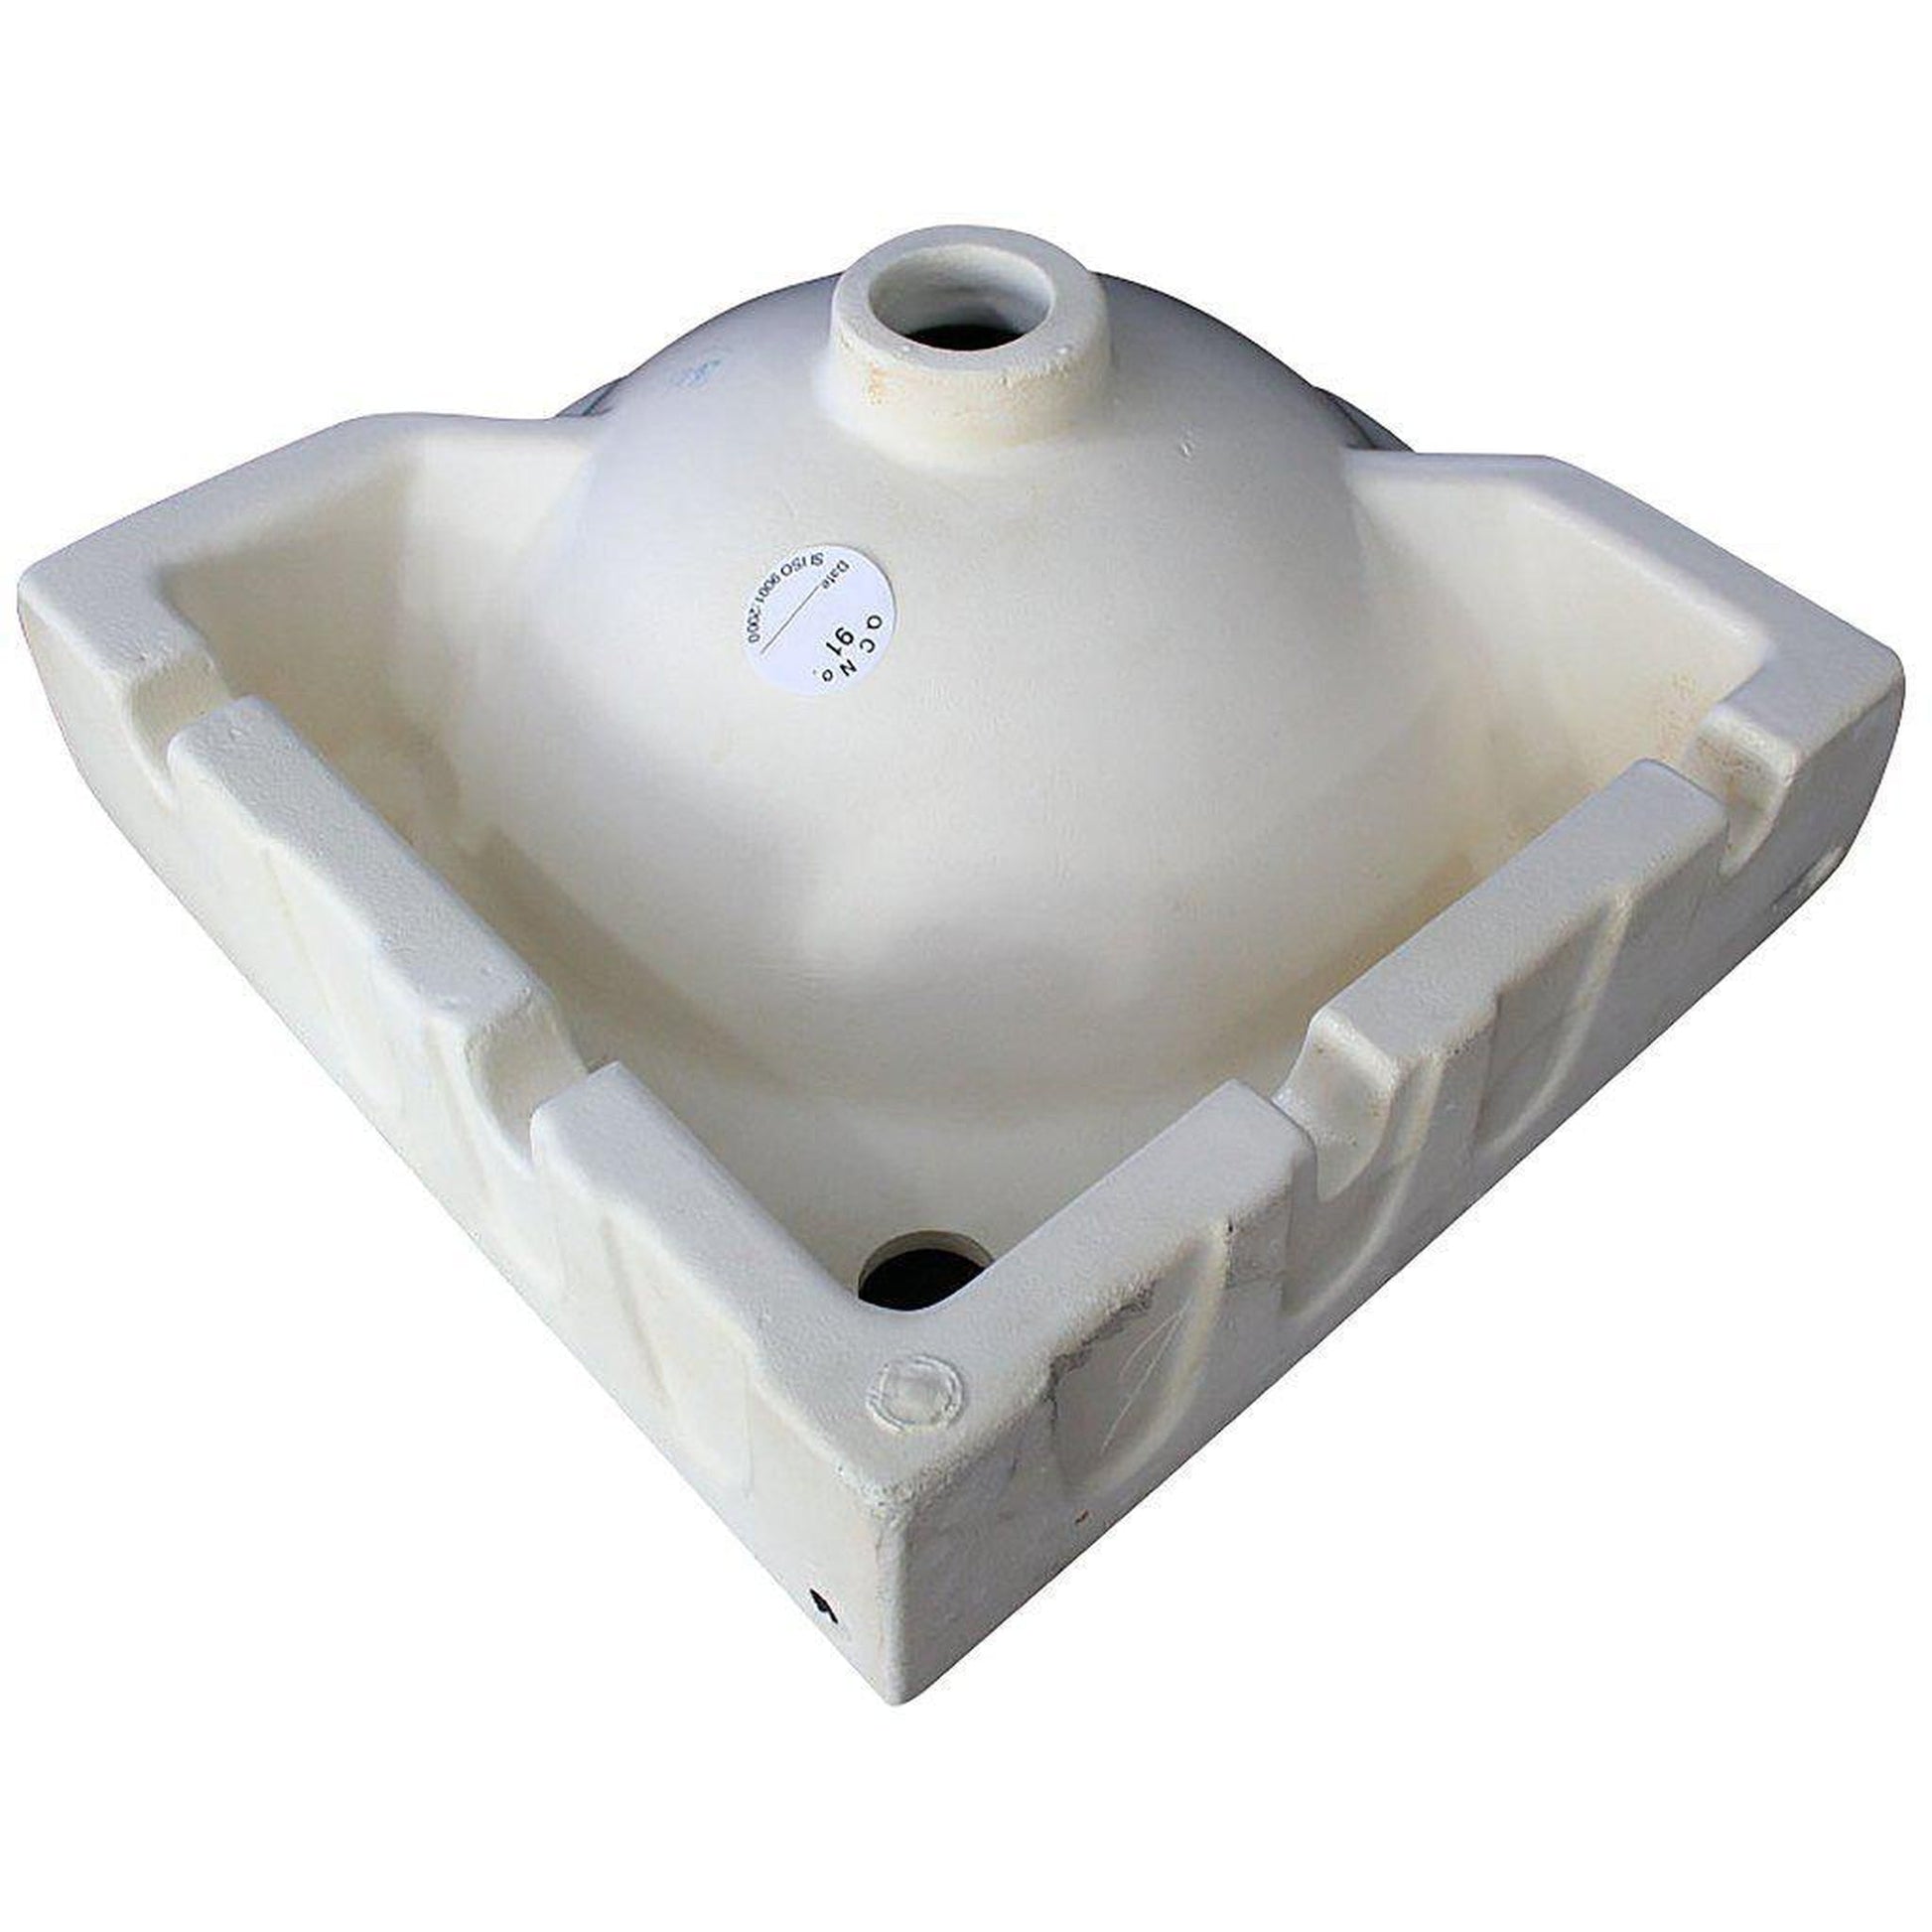 ALFI Brand AB104 15" White Wall-Mounted Corner Round Ceramic Bathroom Sink With Single Faucet Hole